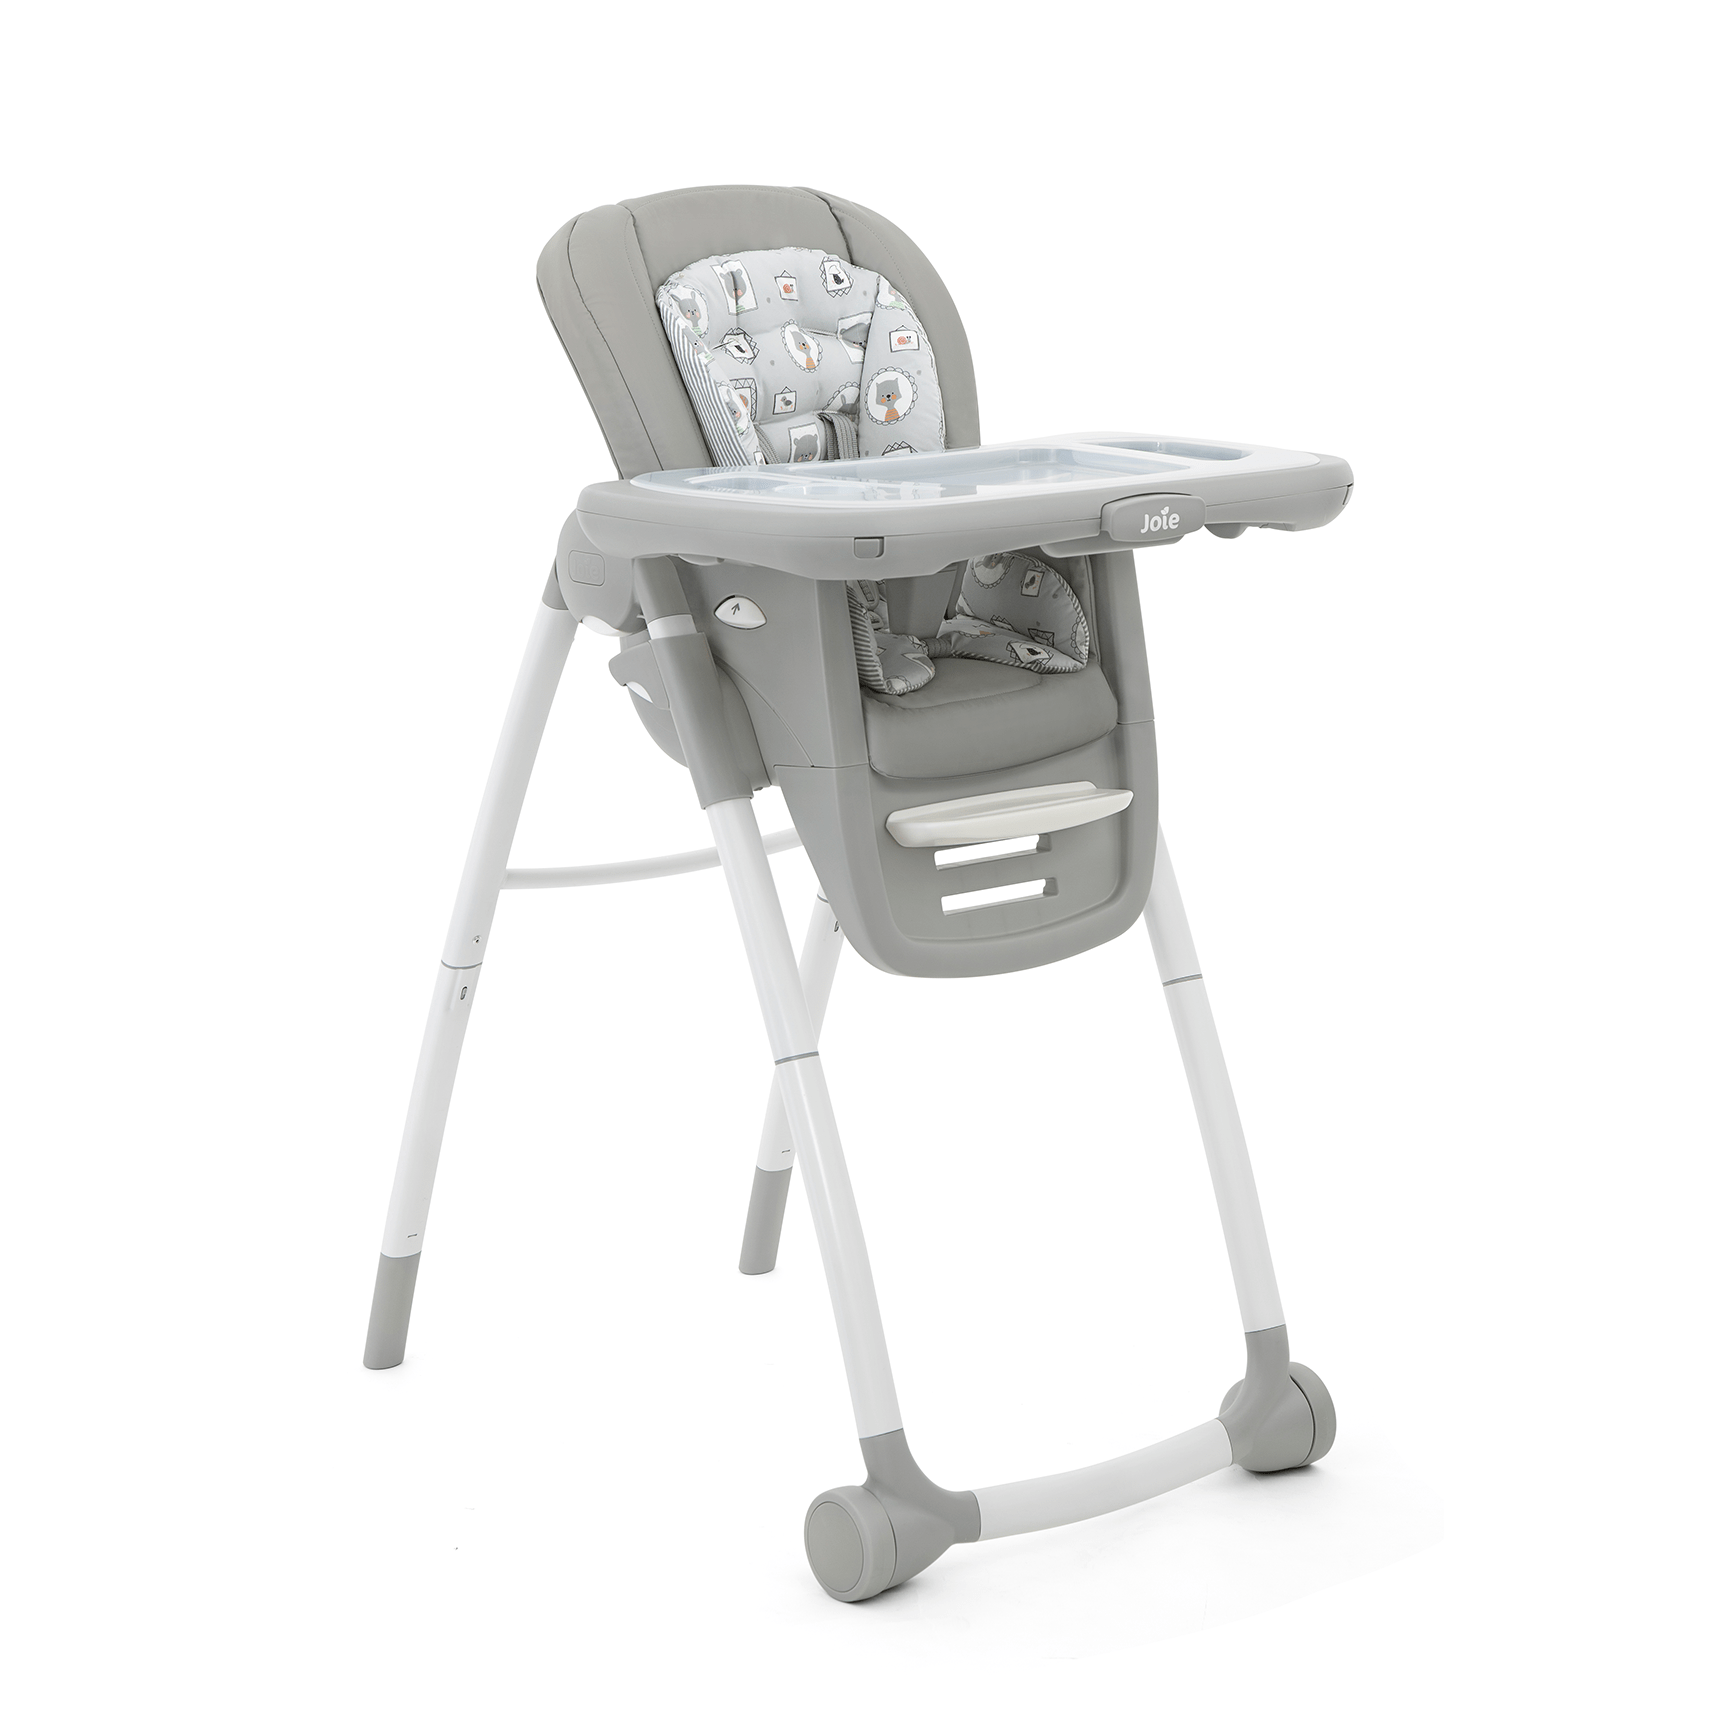 Joie Mimzy Spin Highchair Mountains in 3in1 Geometric